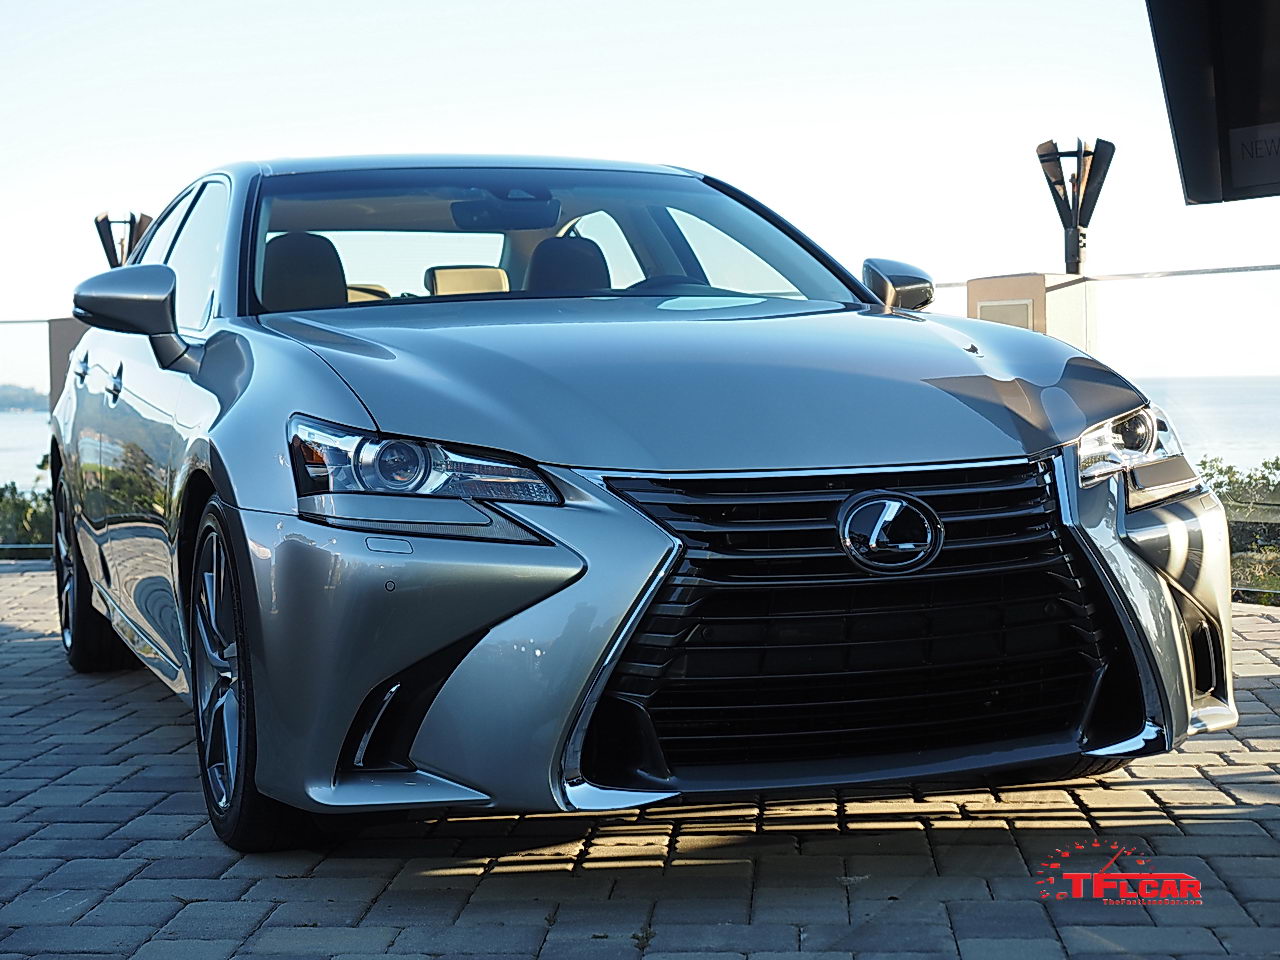 New 2016 Lexus GS 200t Revealed at Pebble Beach The Fast